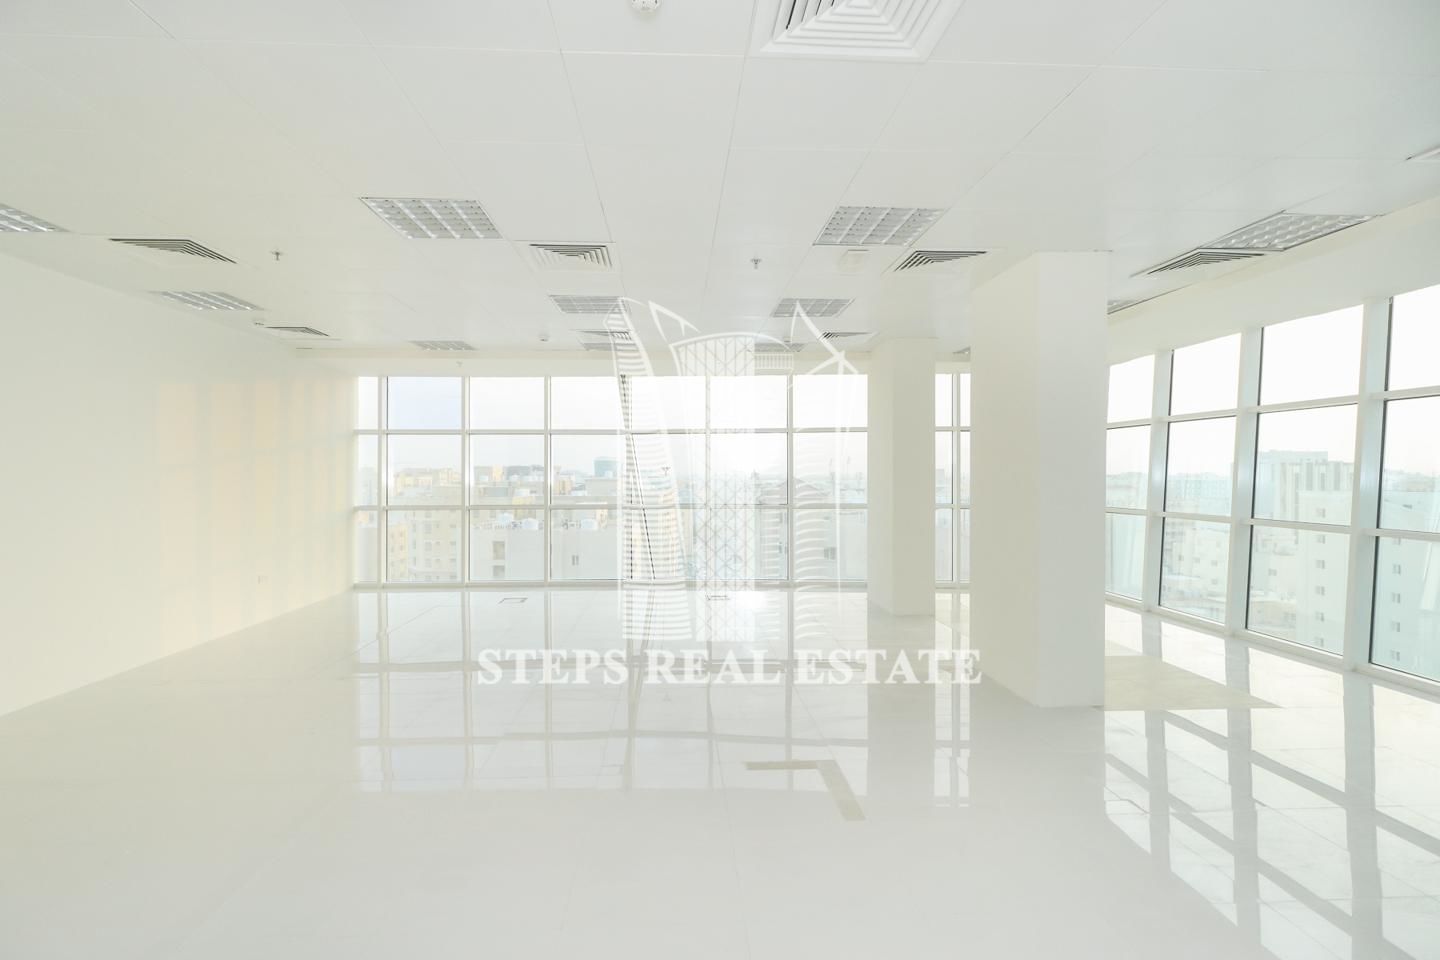 City View Office Spaces